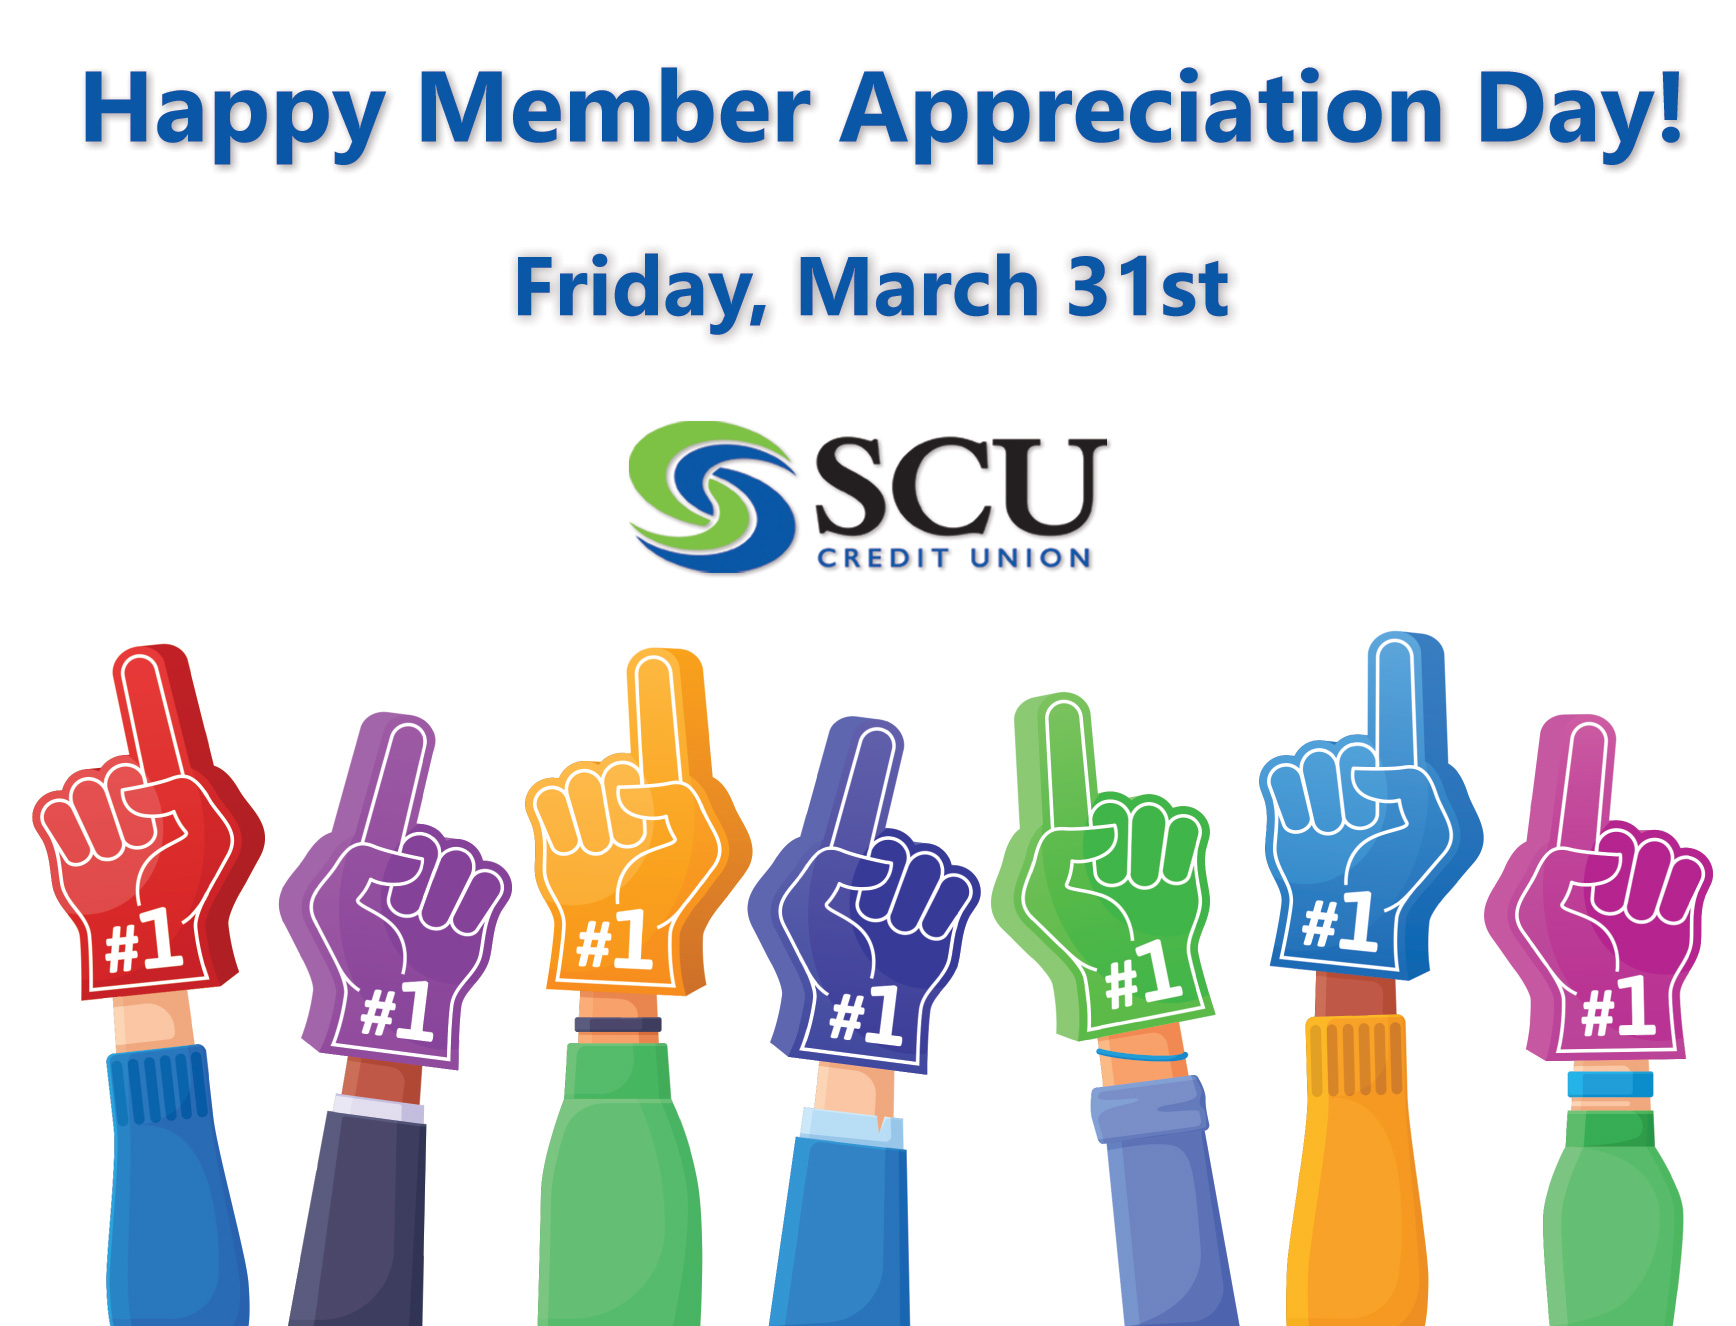 Member Appreciation Day! Come celebrate with us 🎉 ⏰ Monday May